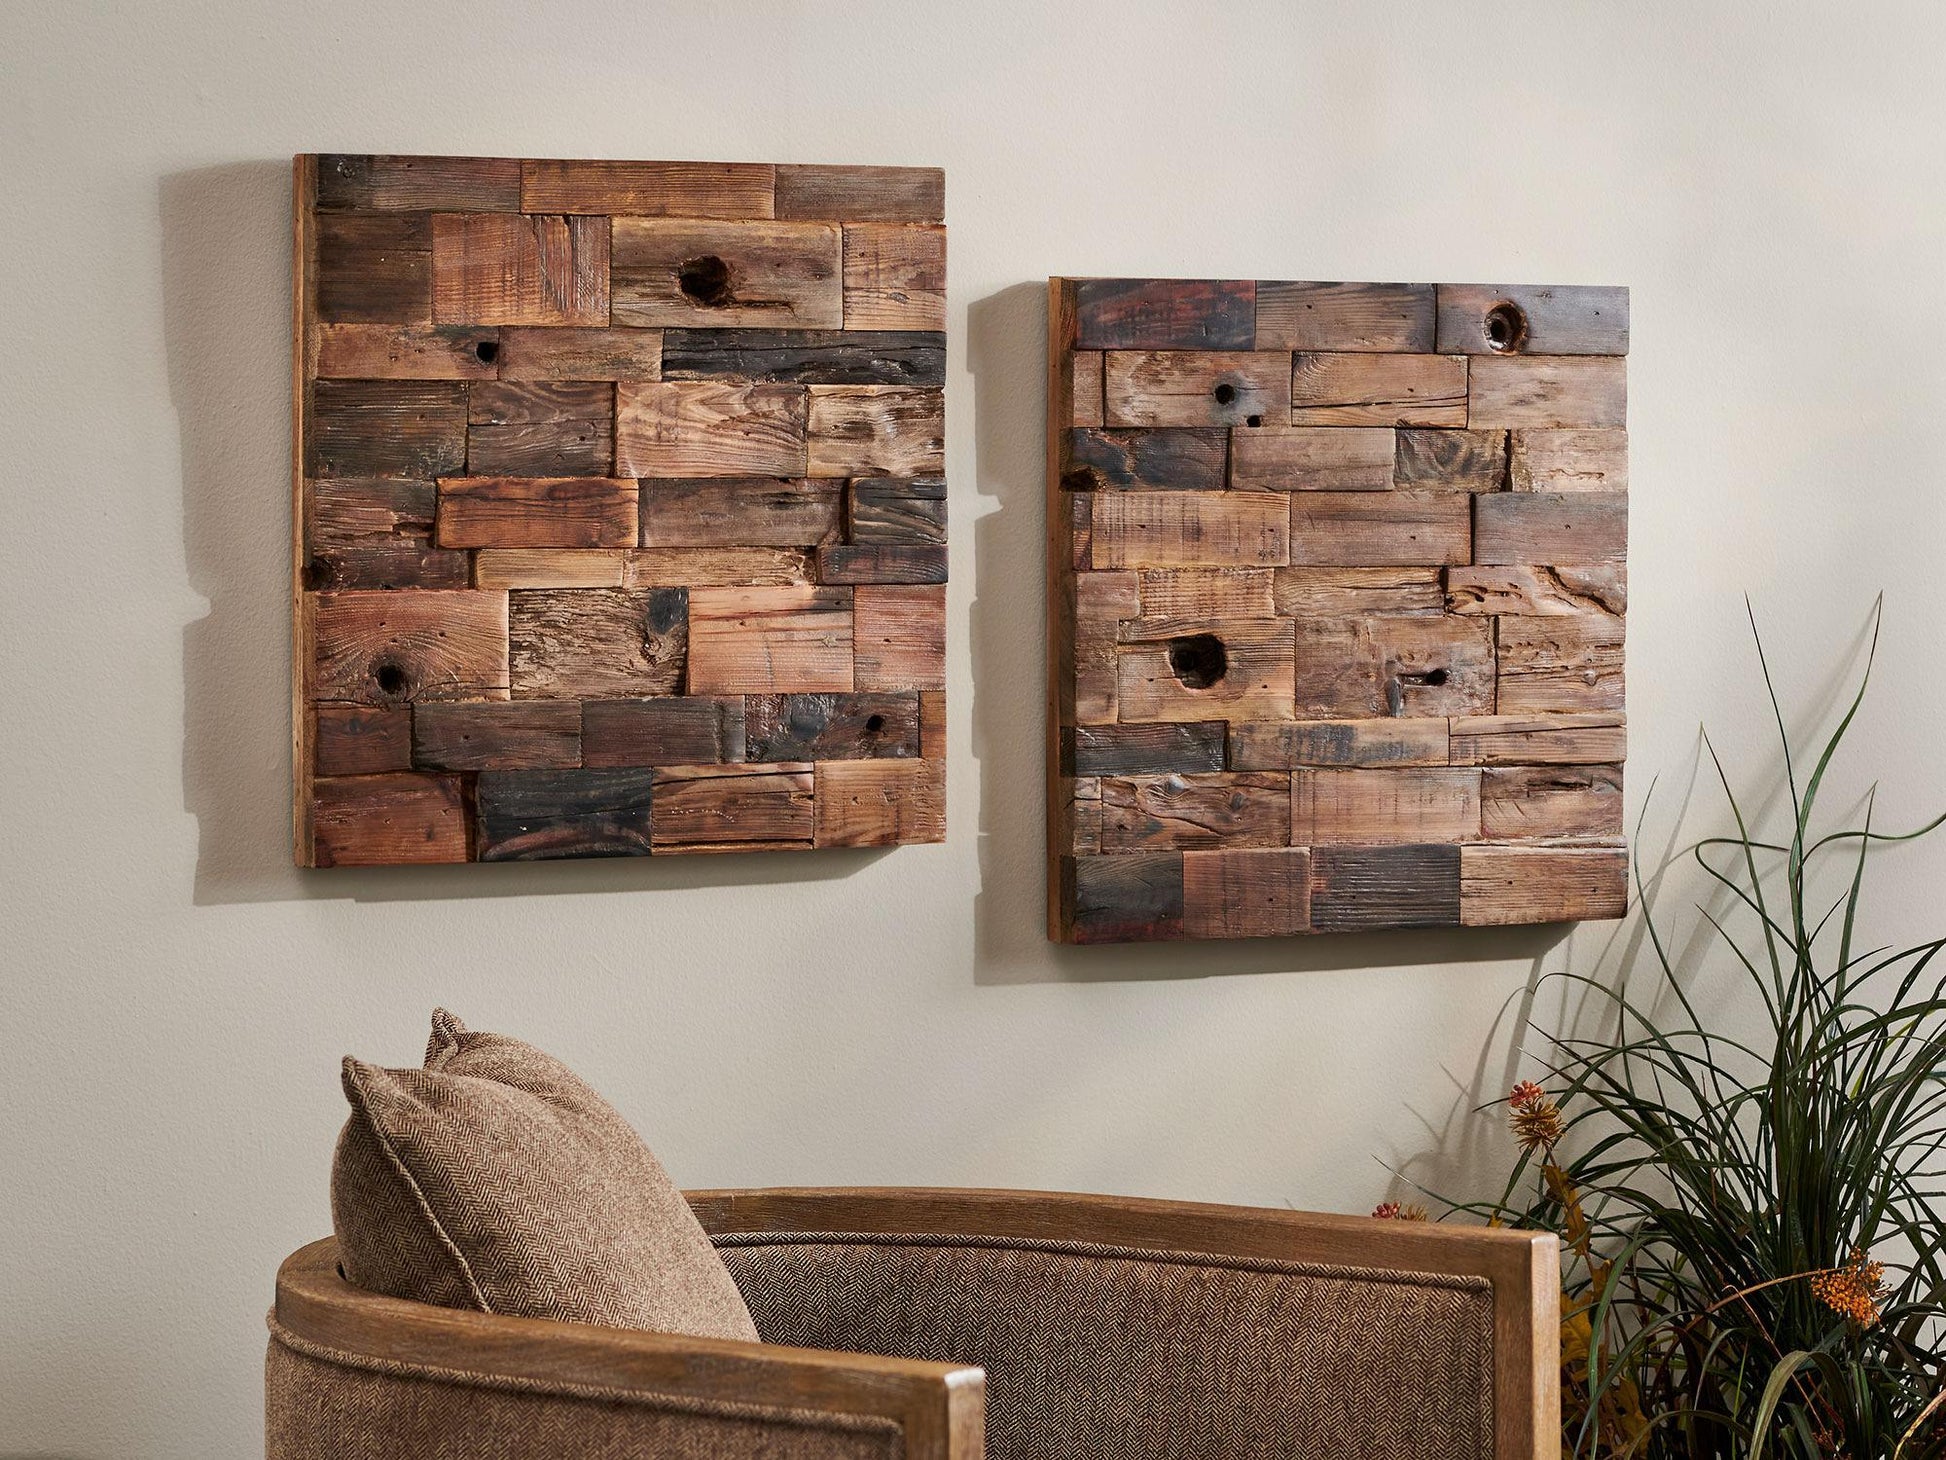 Rustic Wood Wall Decor (Set of 2) - Wild Wings